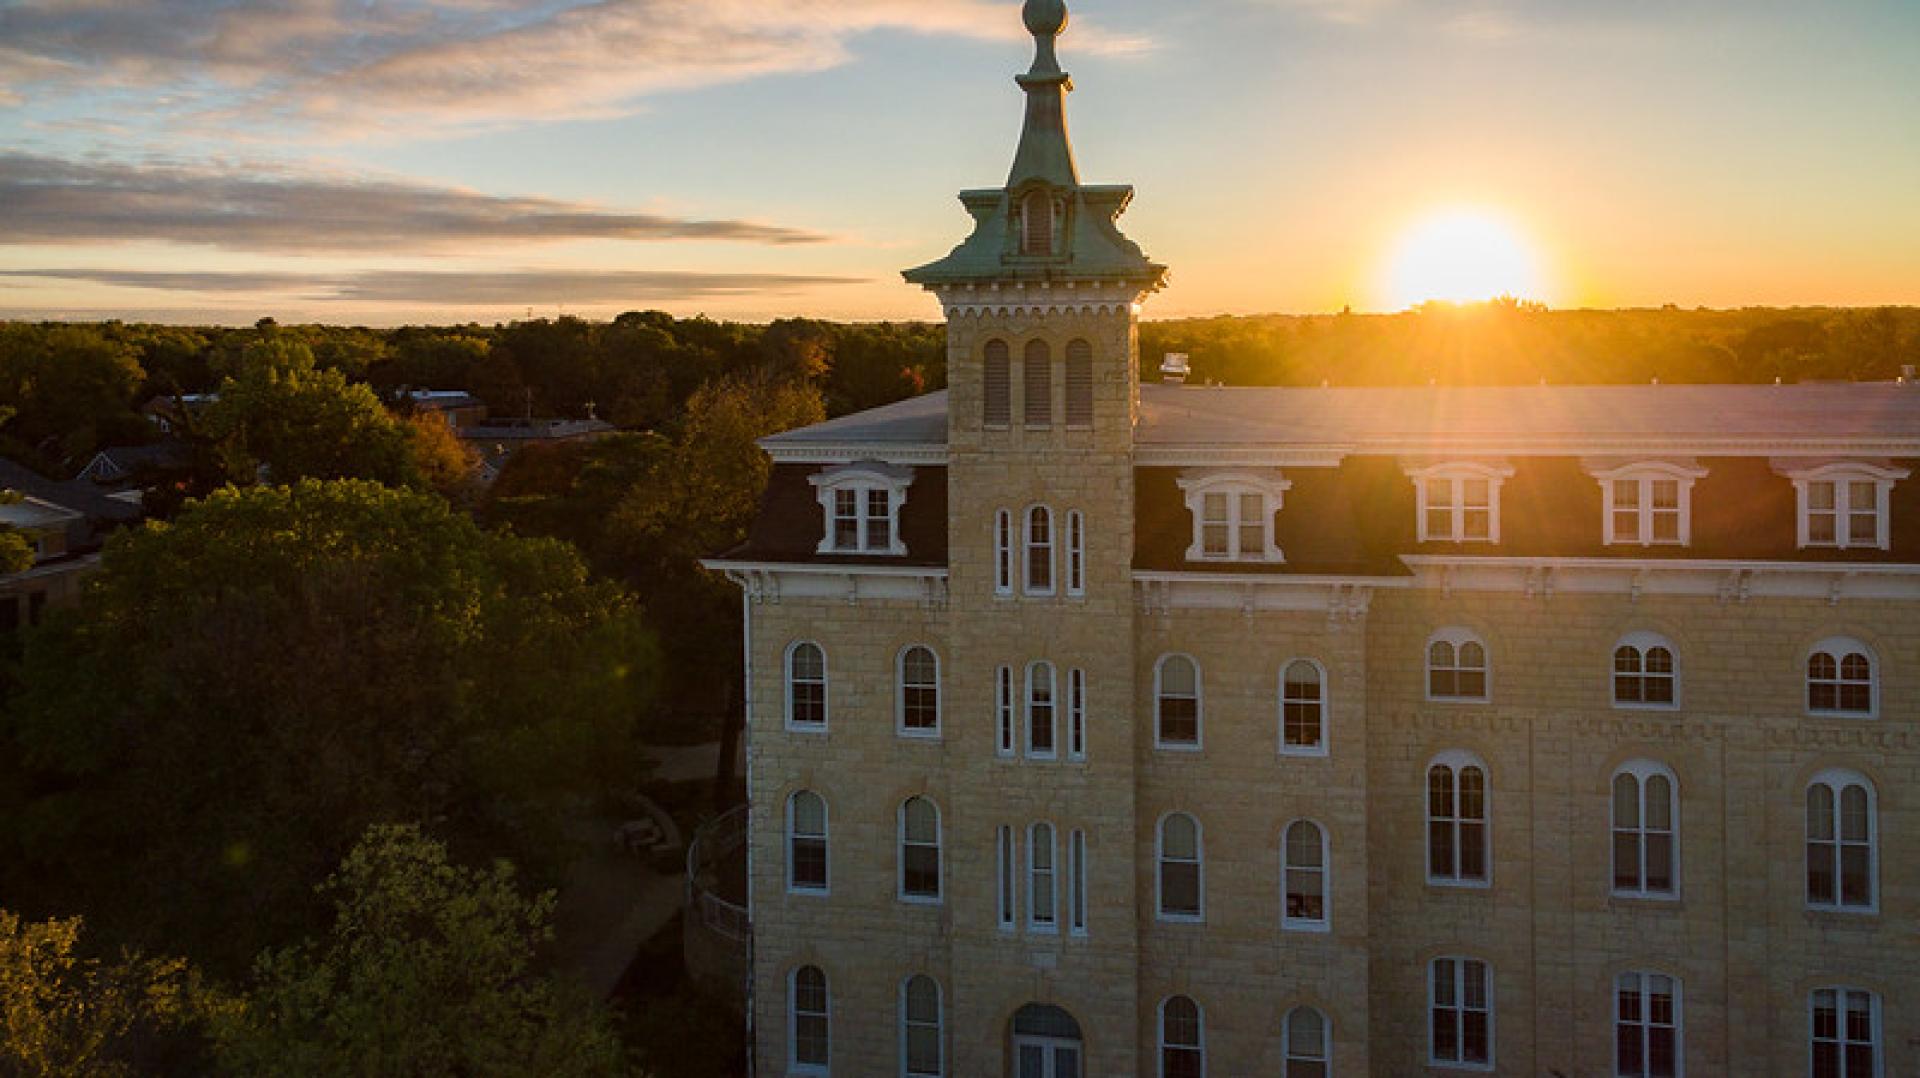 A picture of Old Main at sunrise